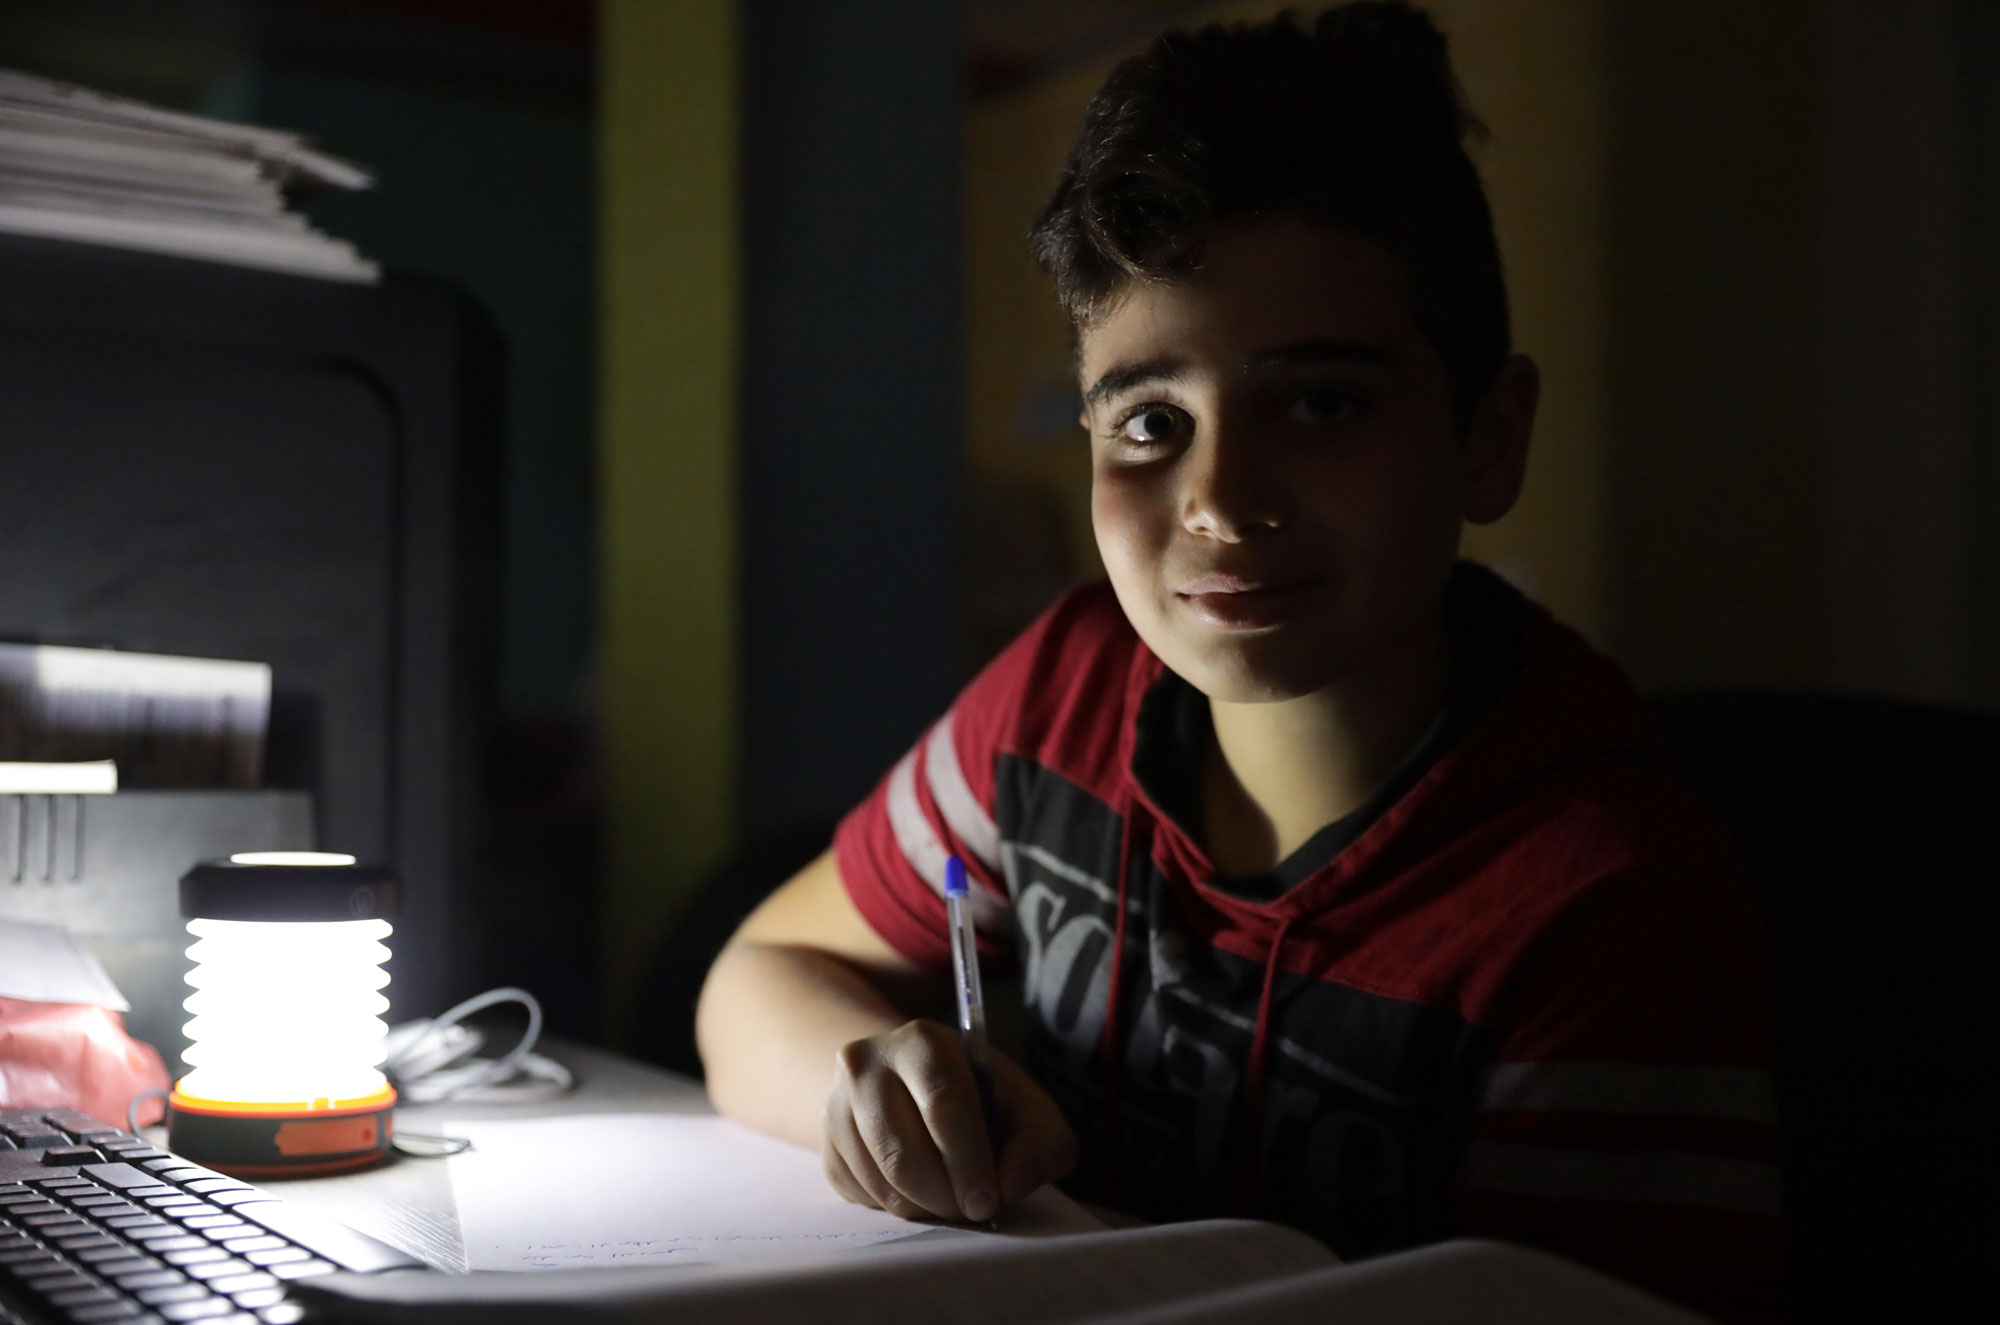 Using a portable light to study in Beirut.